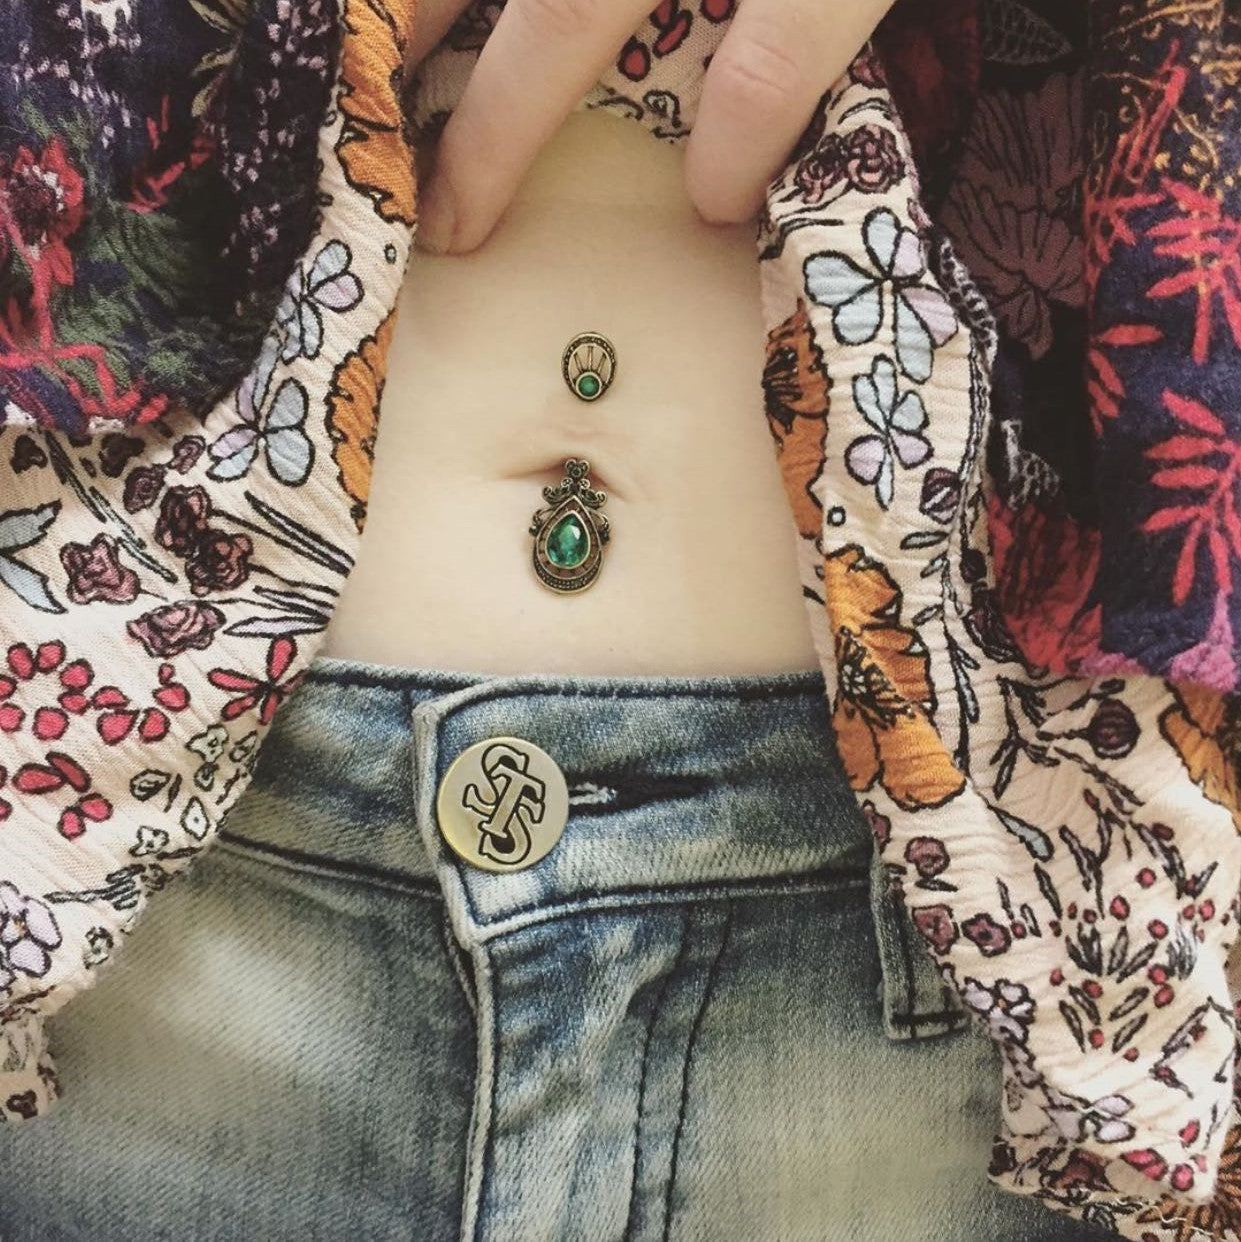 What Does It Feel Like To Get A Belly Button Piercing?